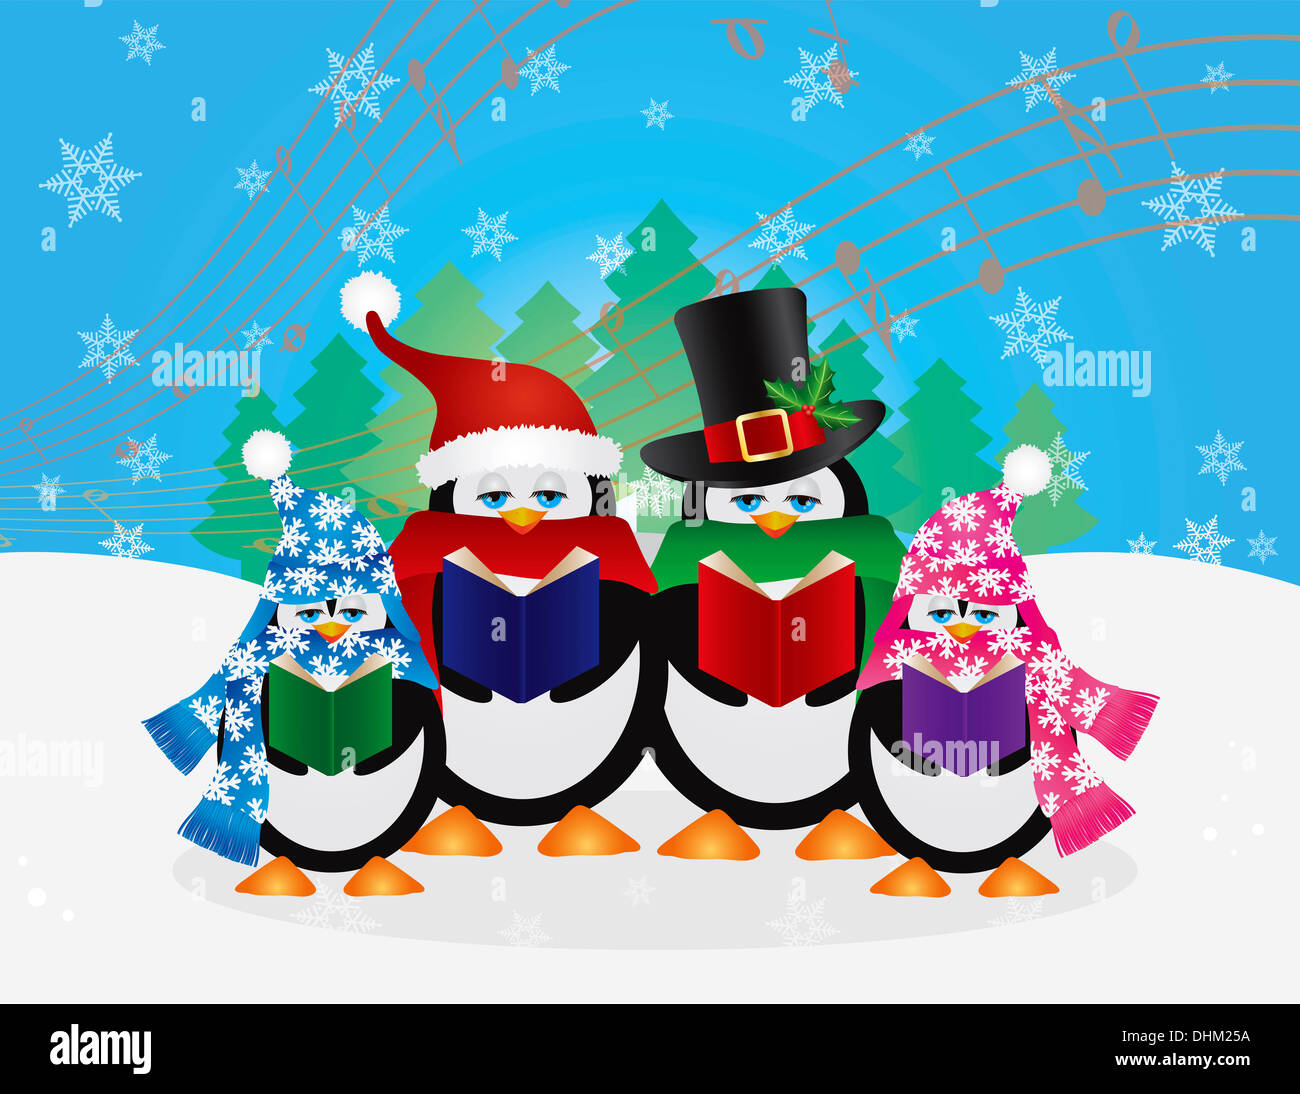 Penguins Christmas Carolers with Hats and Scarfs with Winter Snow Scene and  Random Music Notes Background Illustration Stock Photo - Alamy